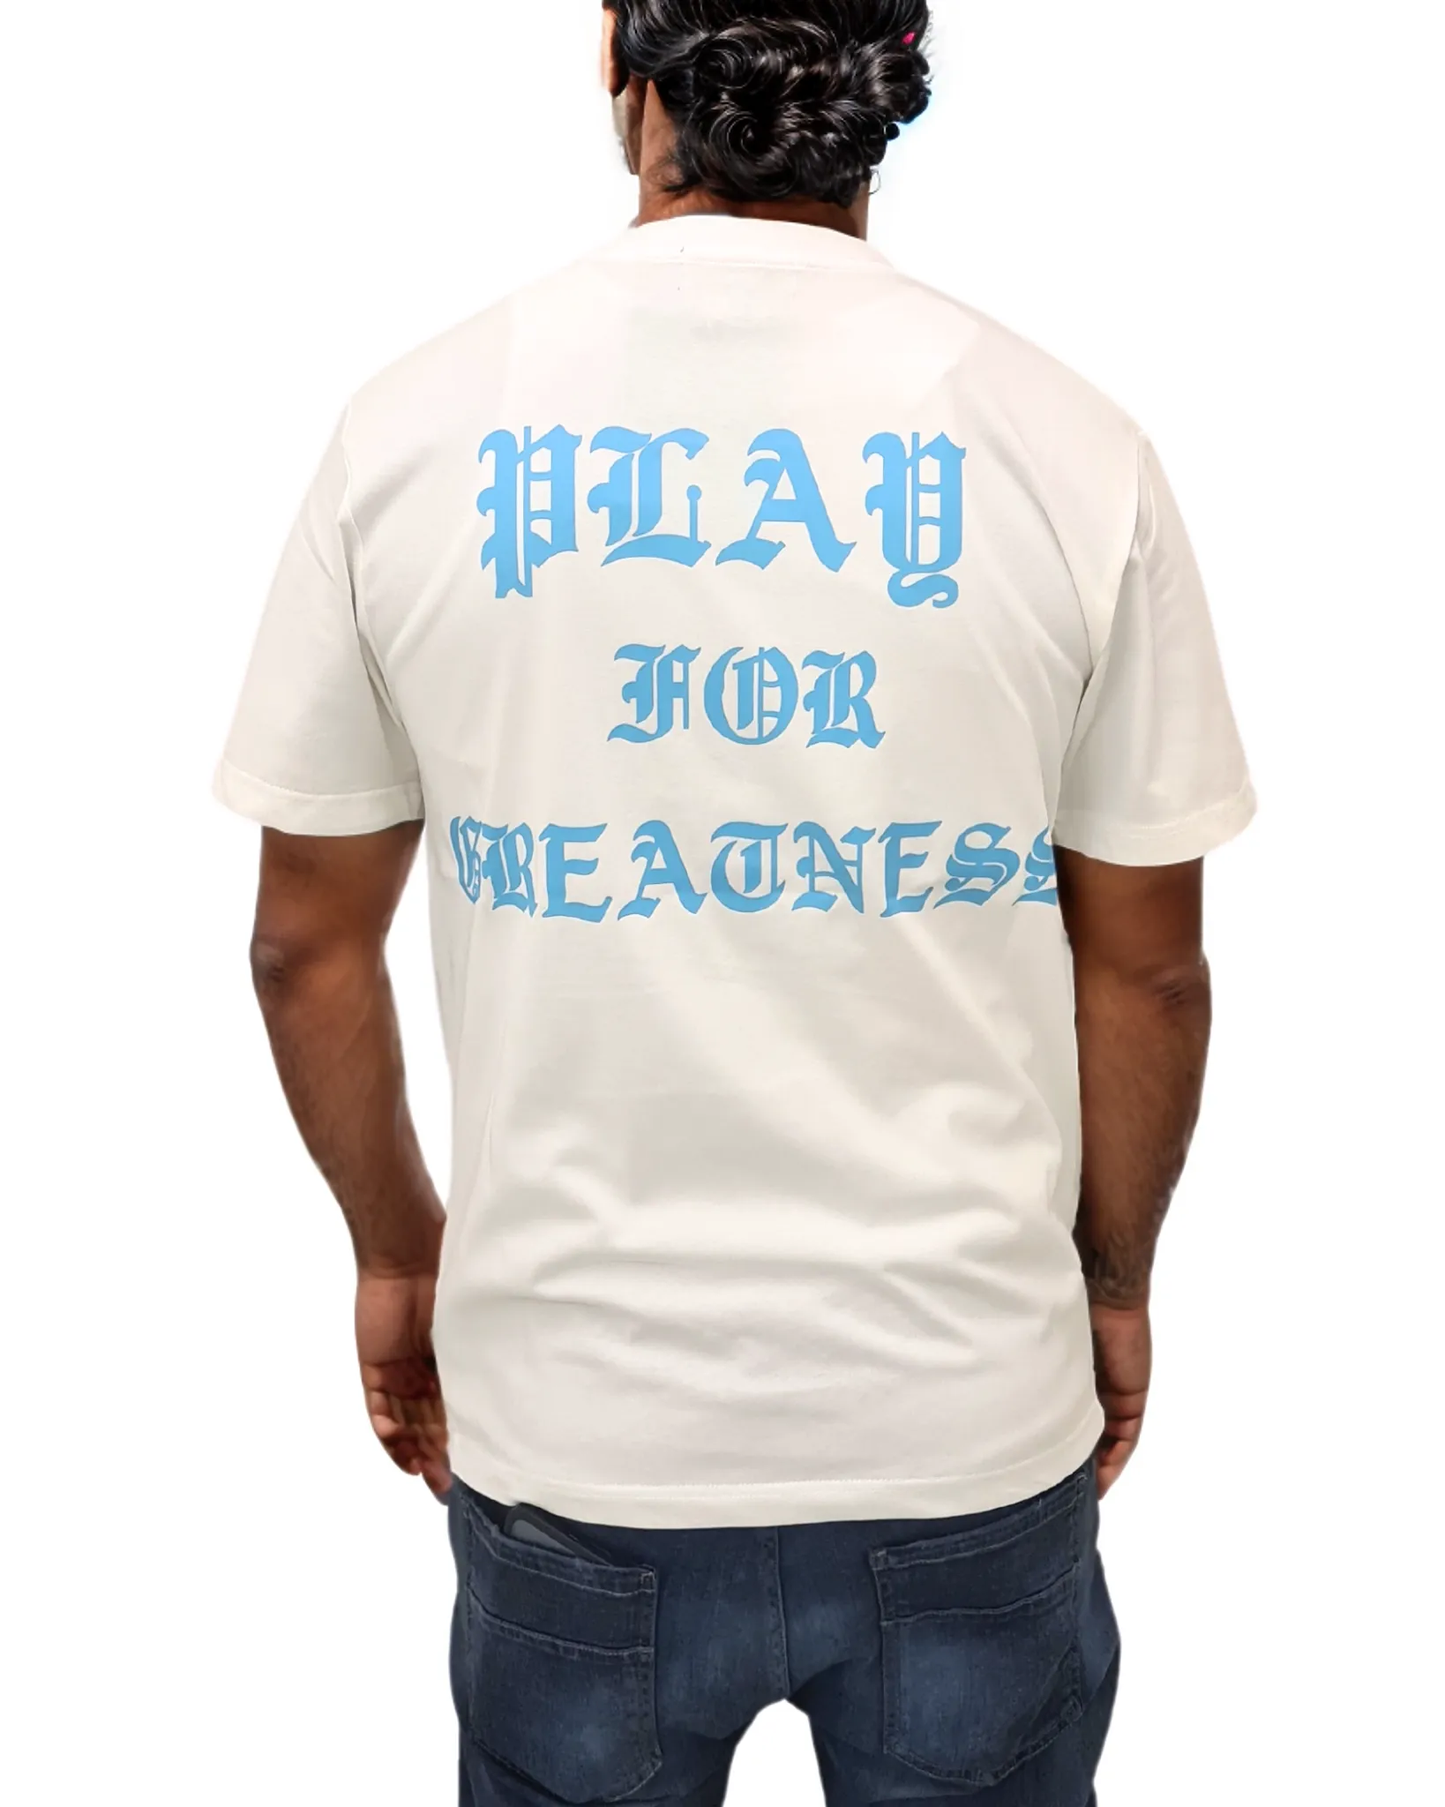 Play For Greatness Shirt